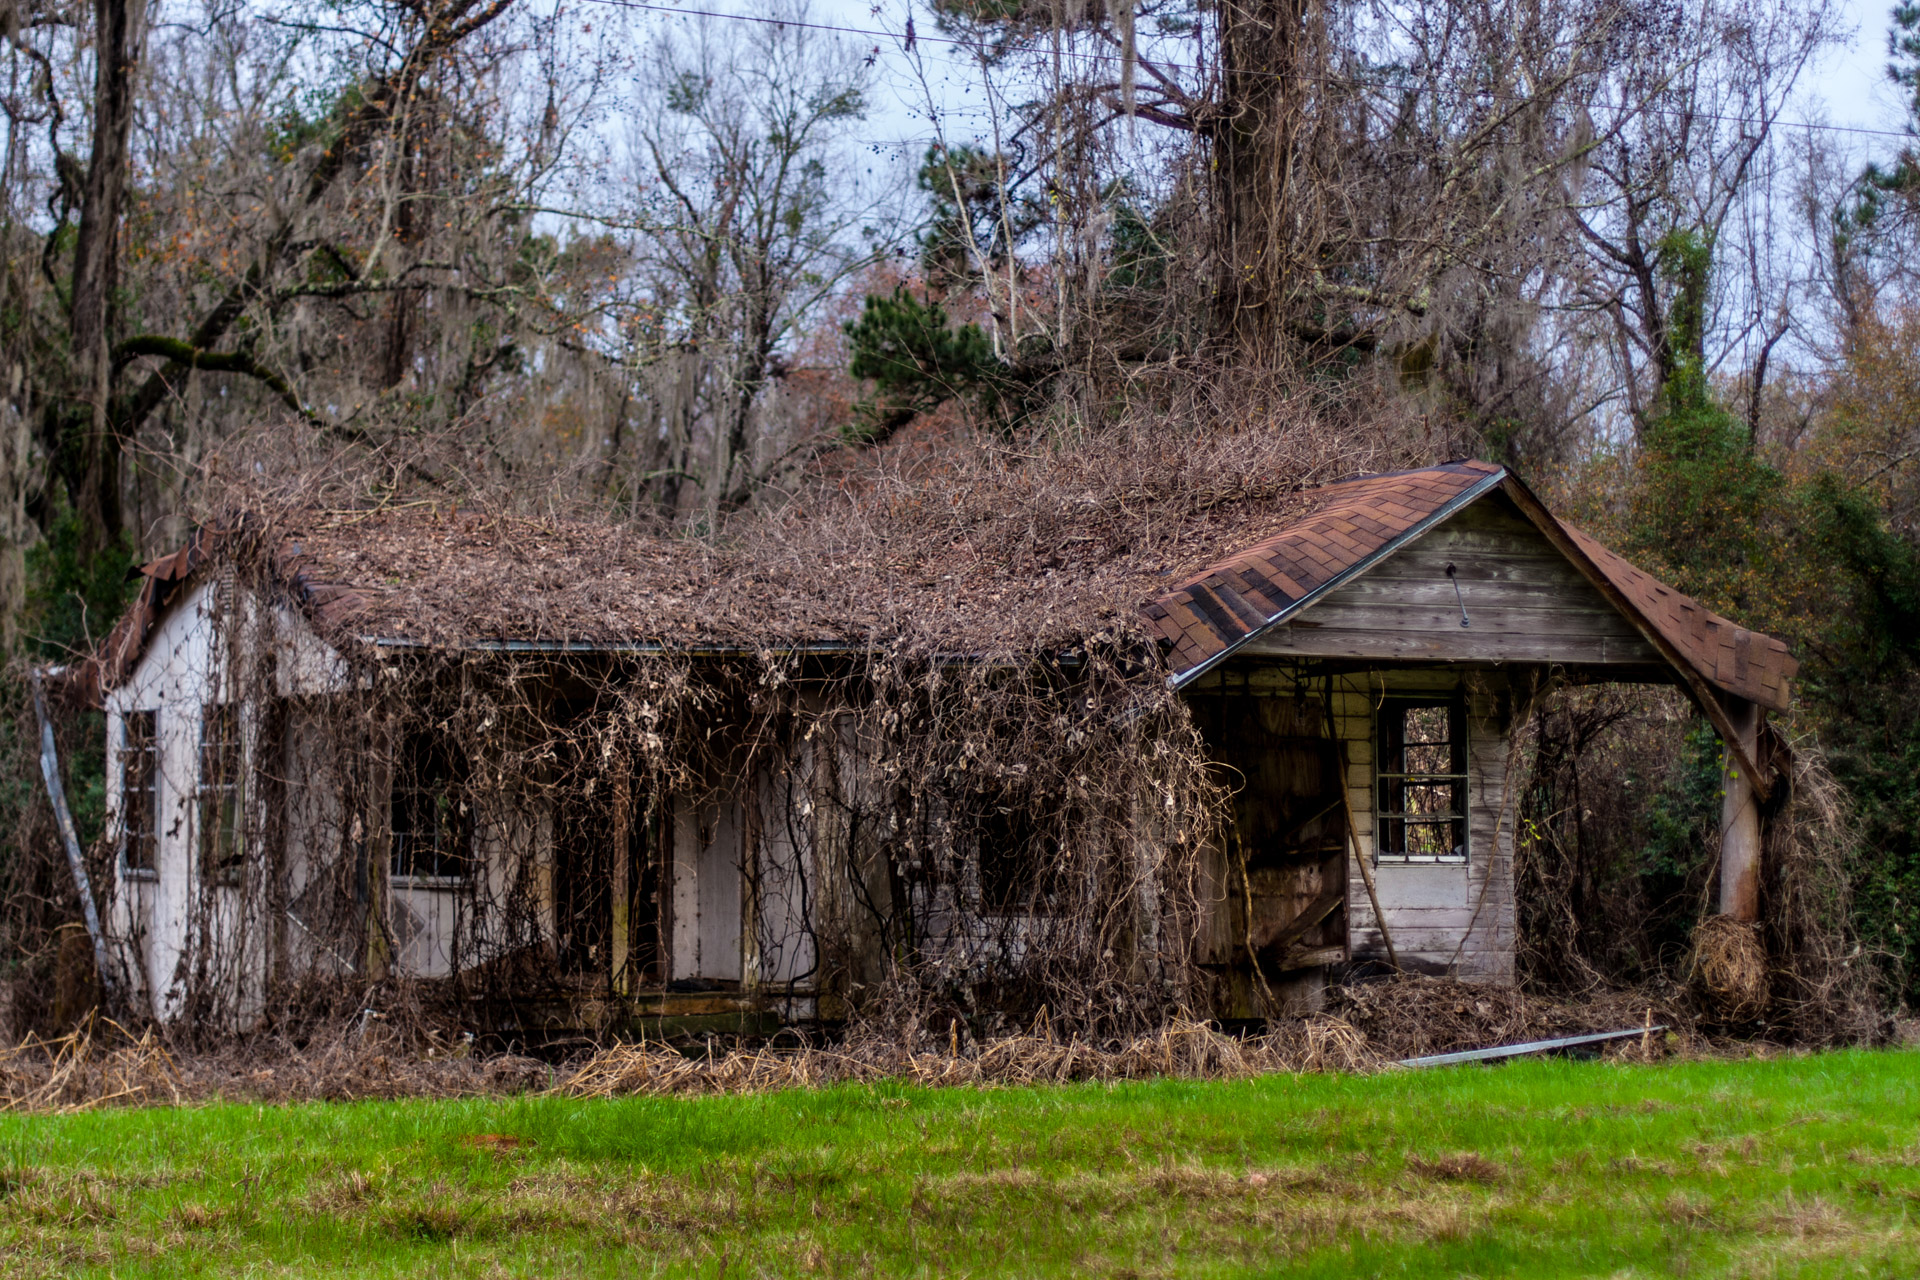 Tallahassee, Florida - A Covered Roof House (left close)